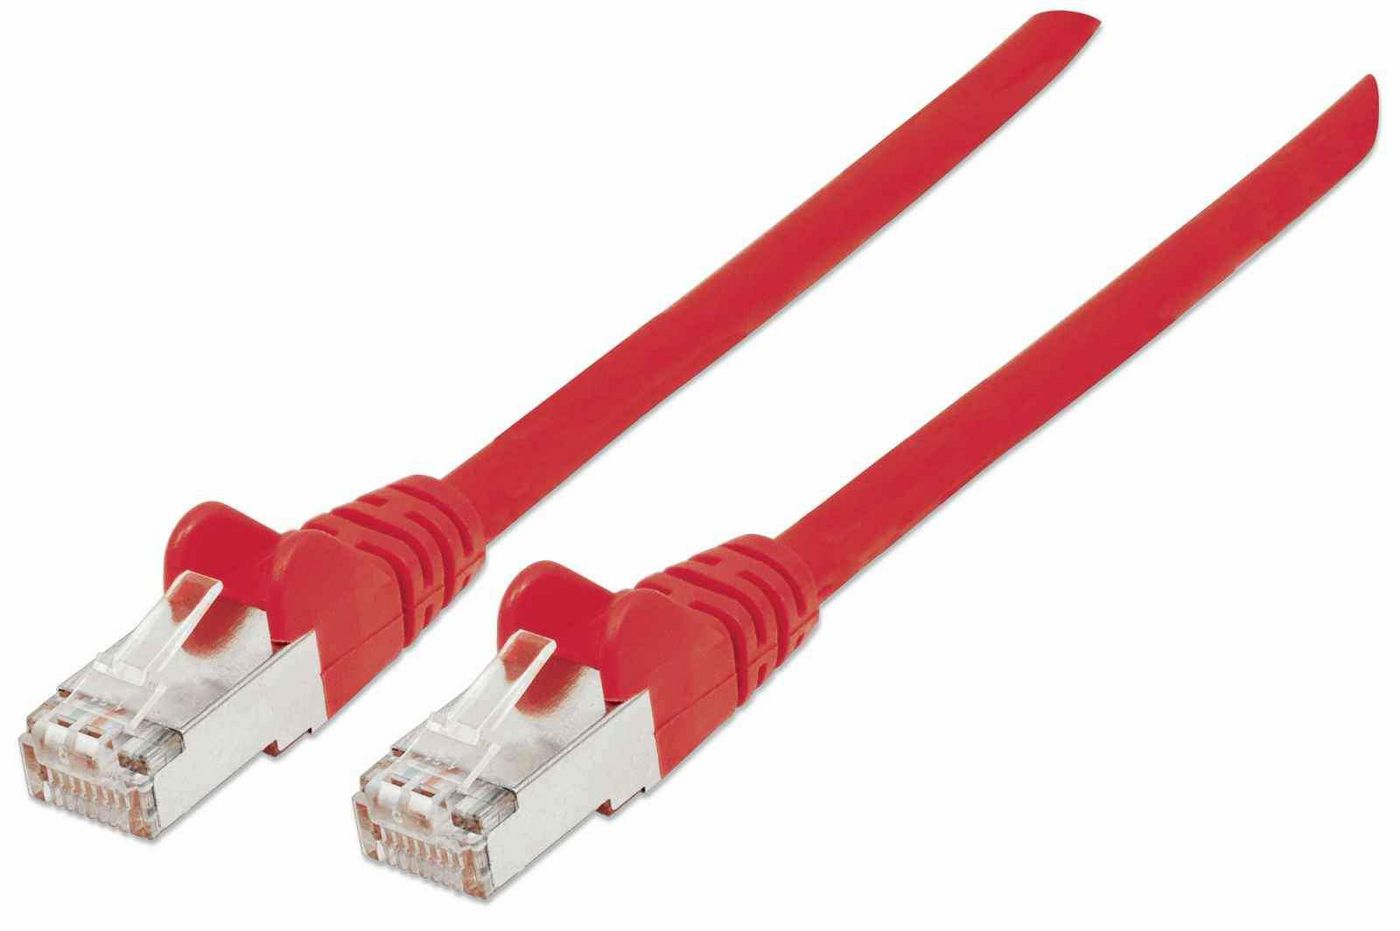 Intellinet 740821 High Performance Network Cable 